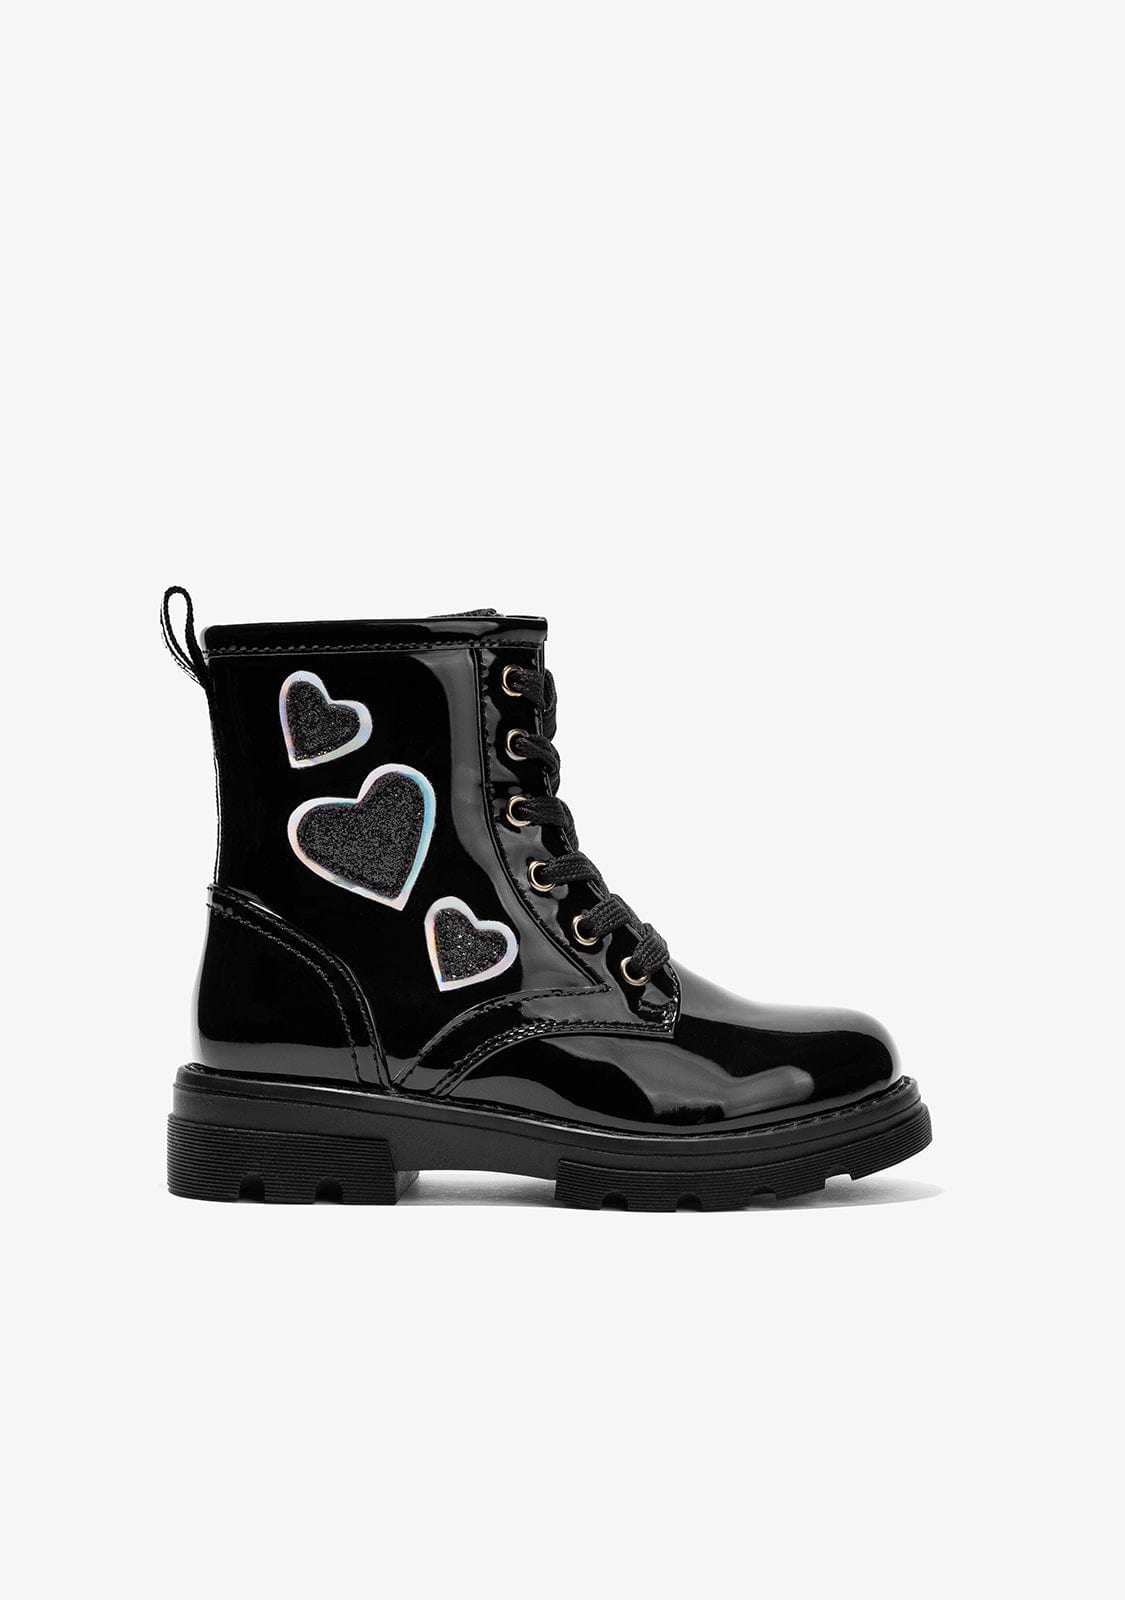 CONGUITOS Shoes Girl's Black Patent Ankle Boots With Glitter Hearts